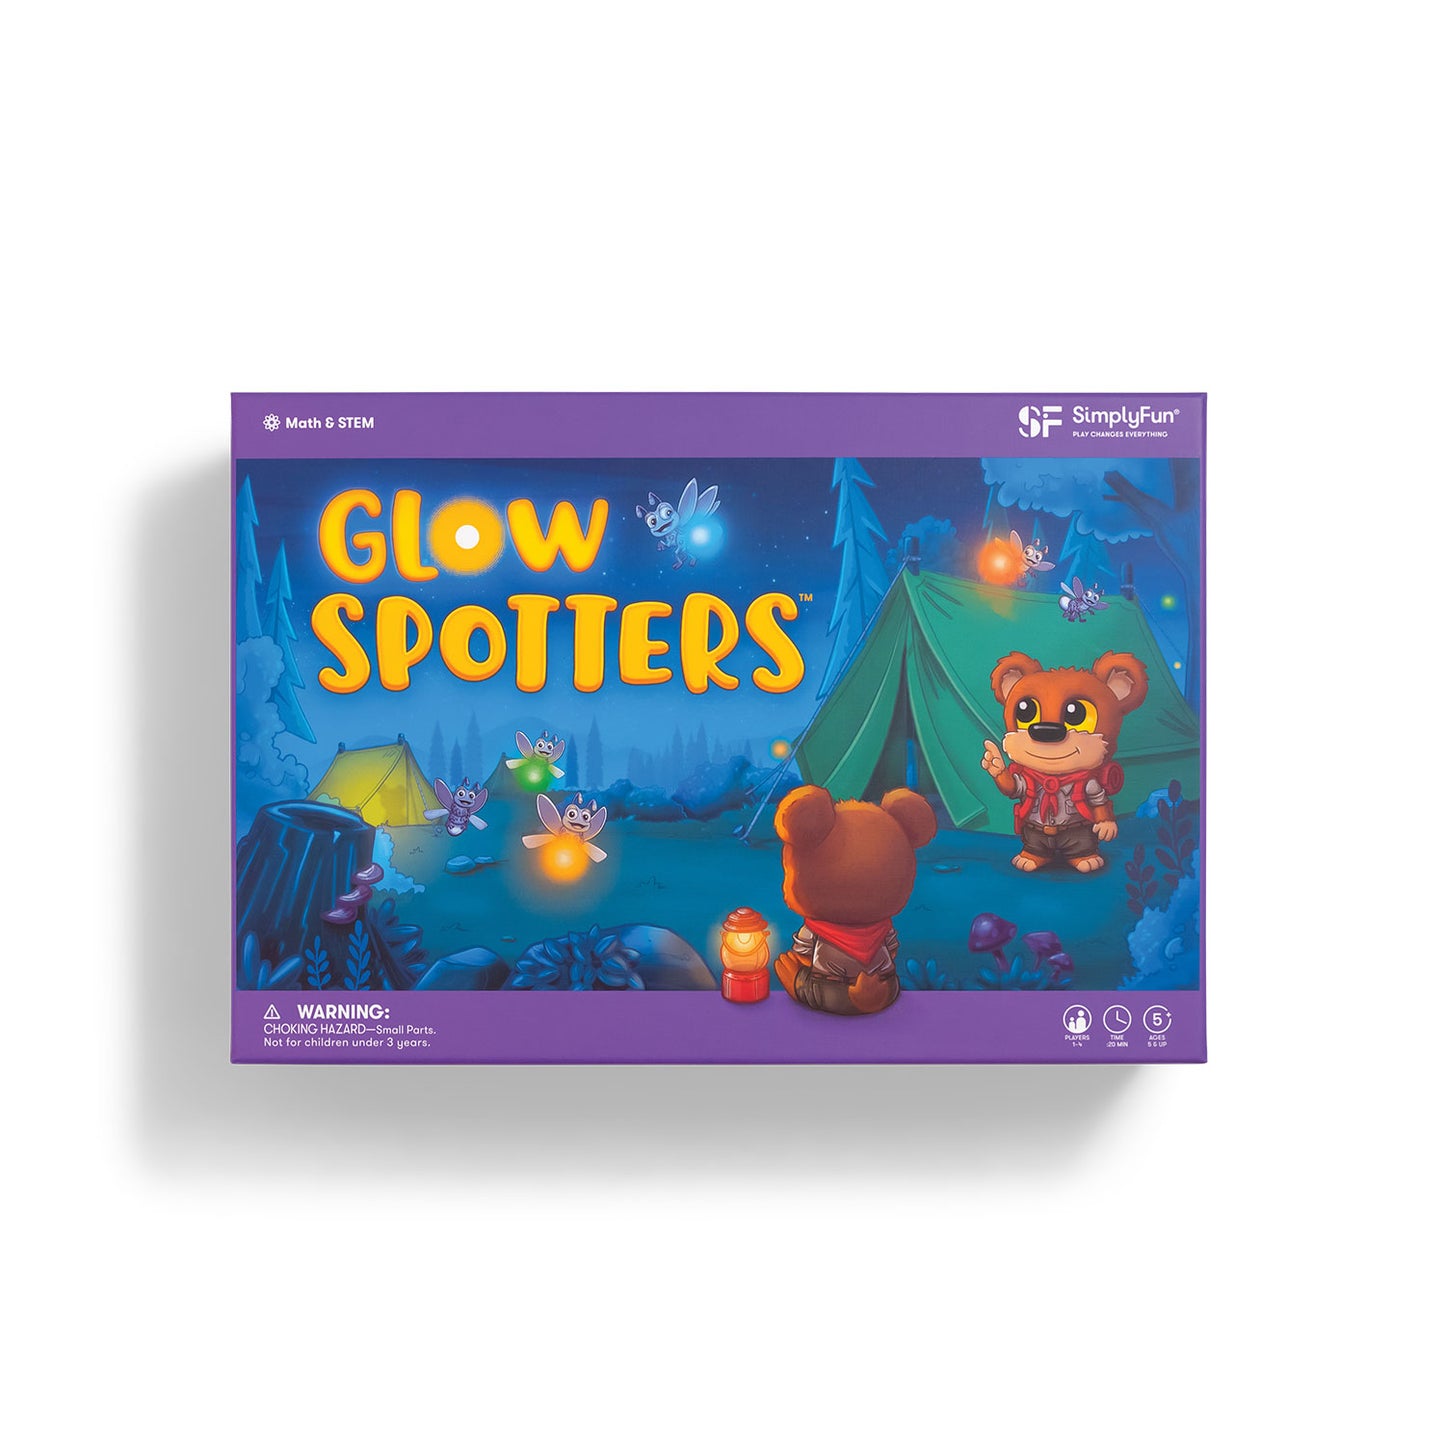 Glow Spotters- Firefly addition math game for ages 5+